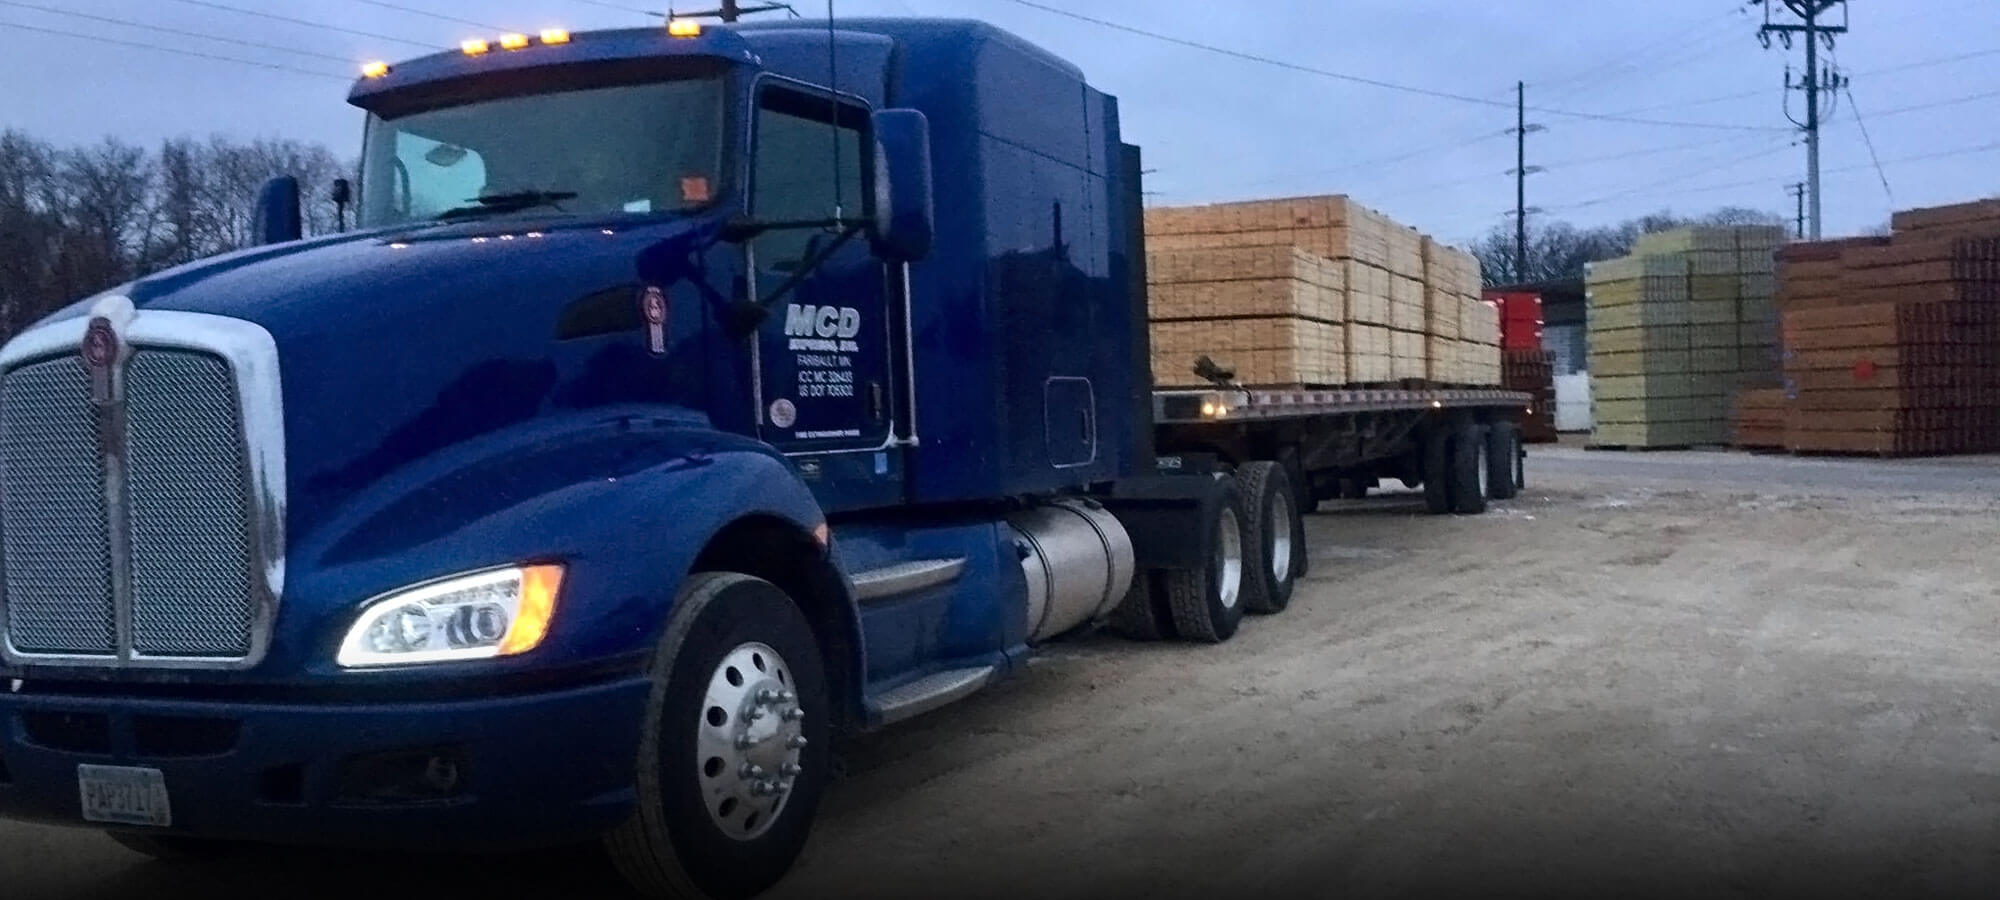 Royal blue MCD Express semi tractor connected to a flatbed trailer that's getting loaded with plywood and lumber